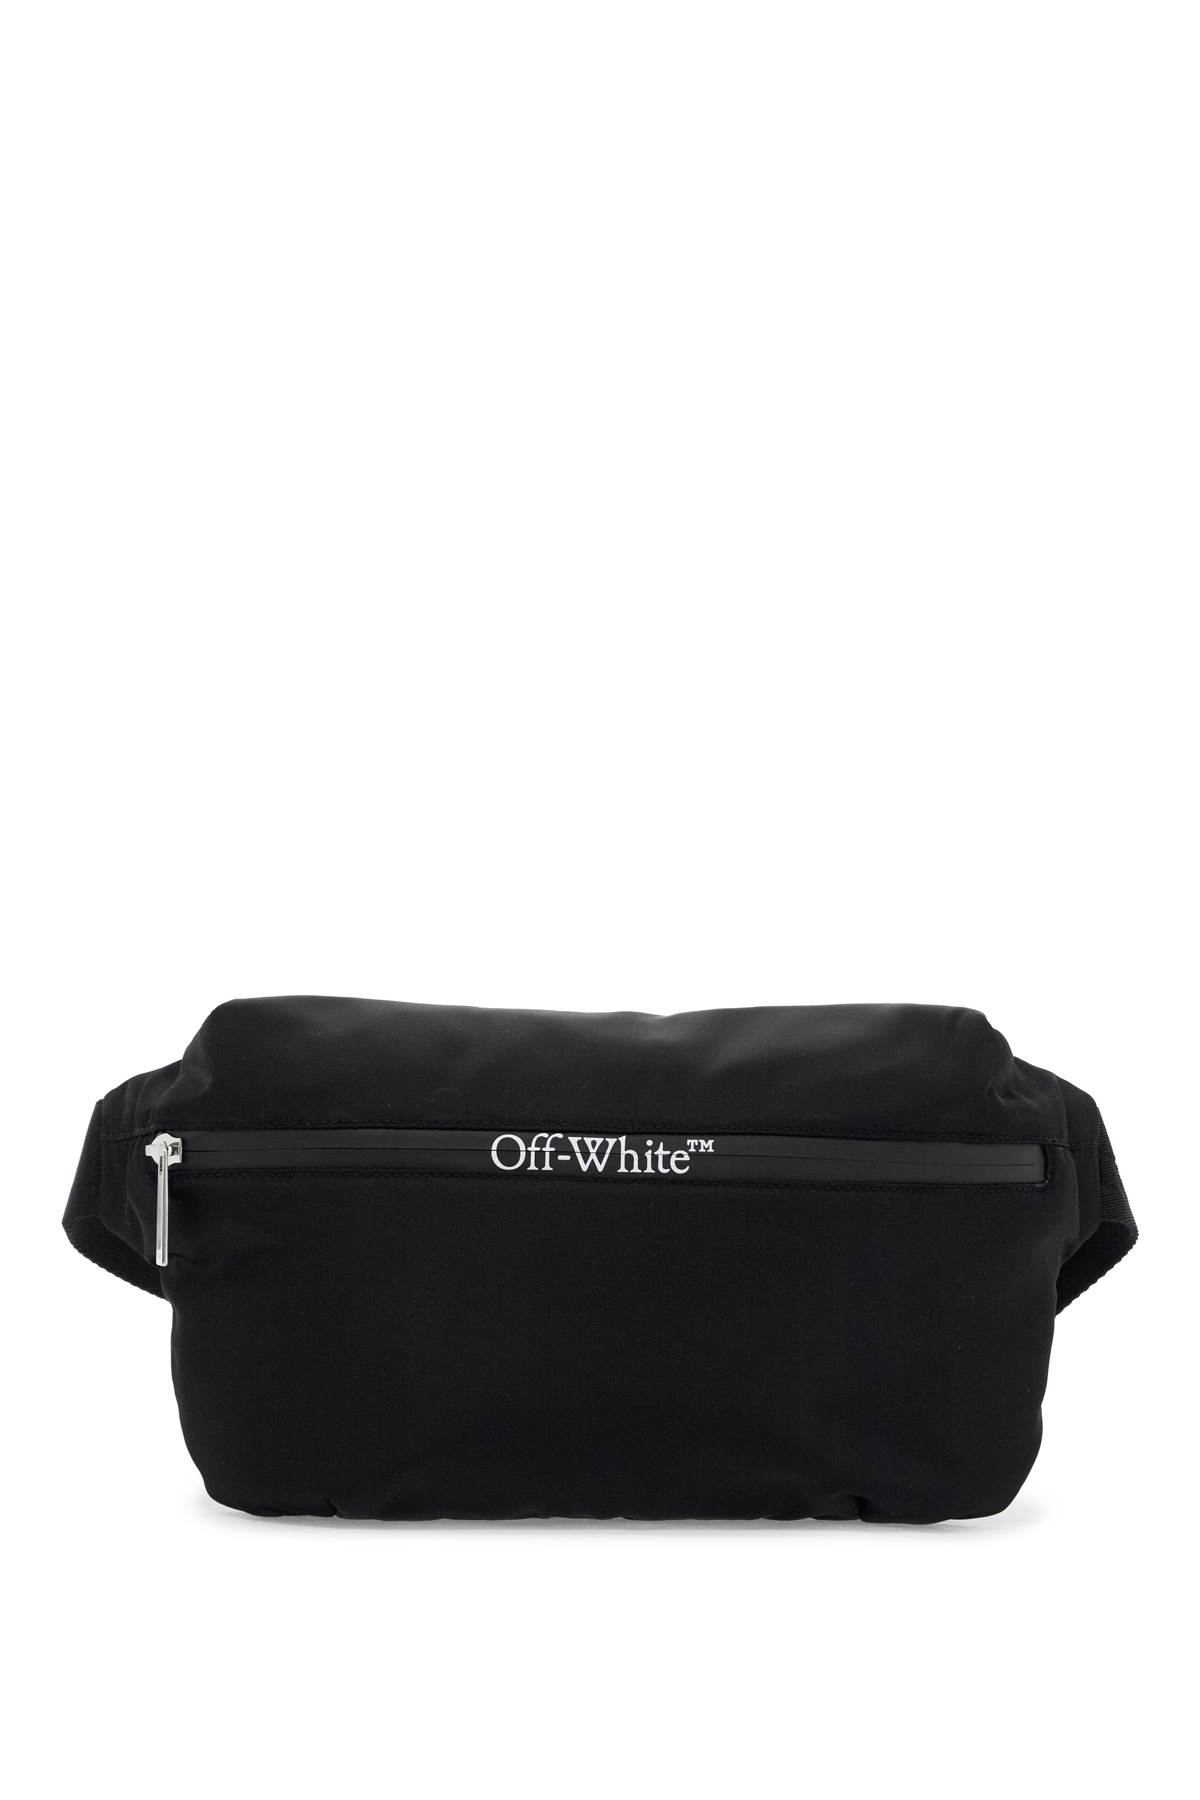 Nylon Pouch For Carrying